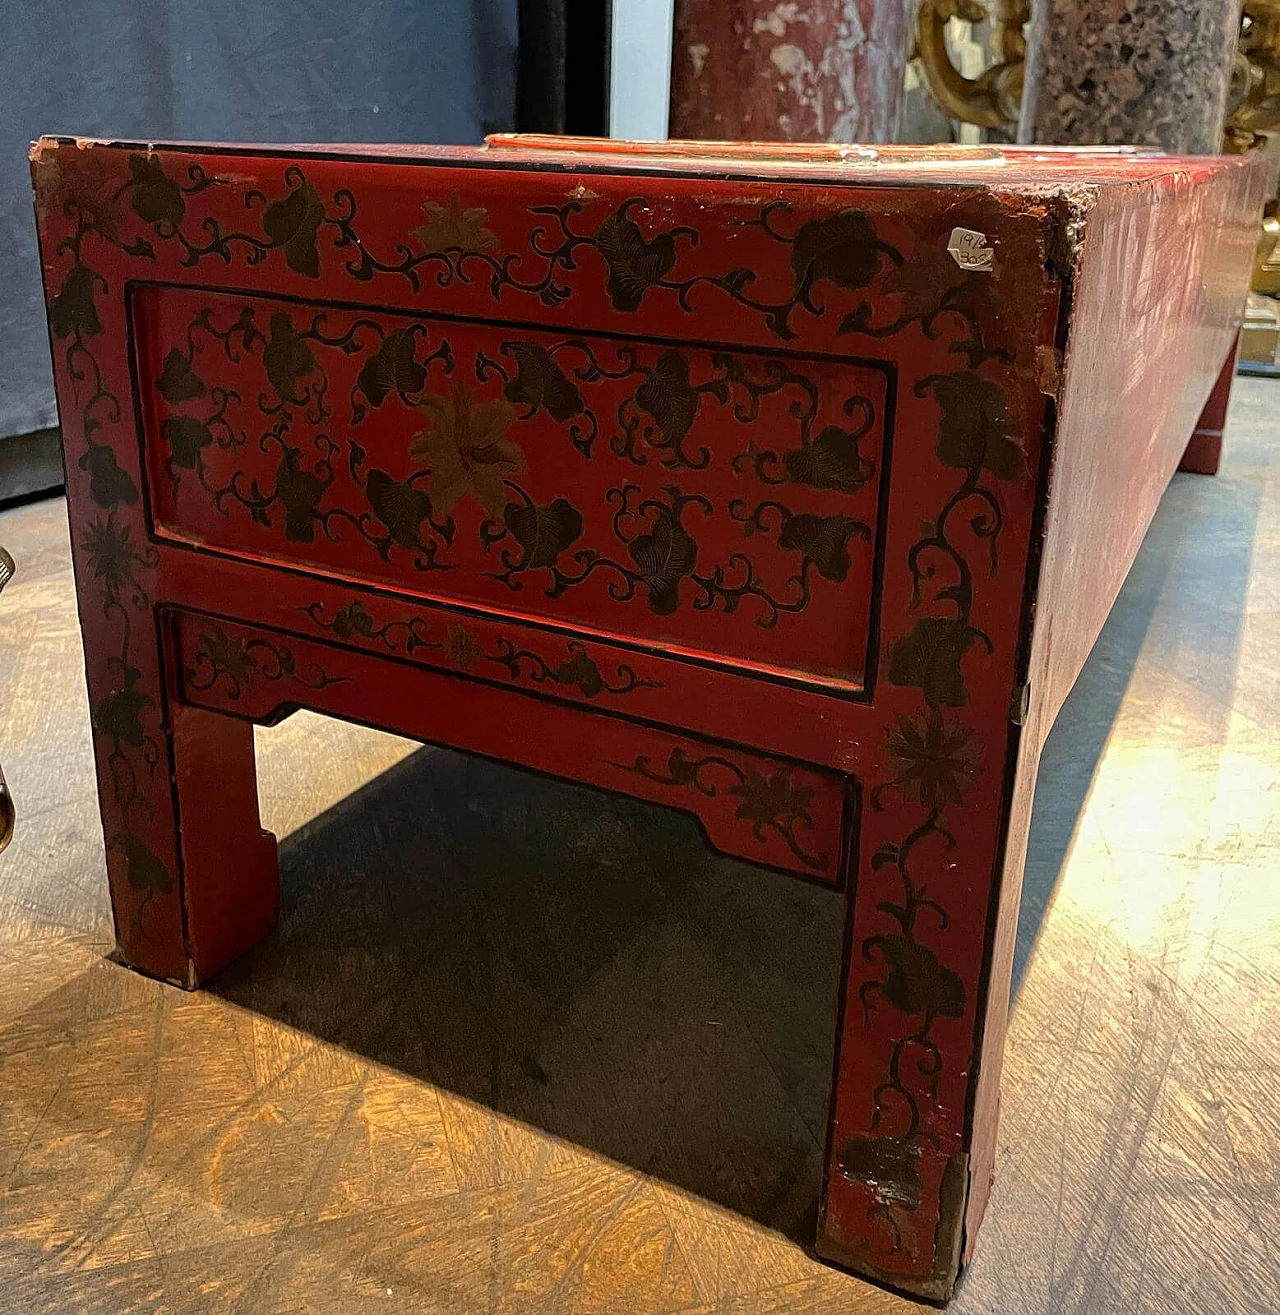 Chinese coffee table in red lacquered wood with floral decorations and scenes, 1930s 1